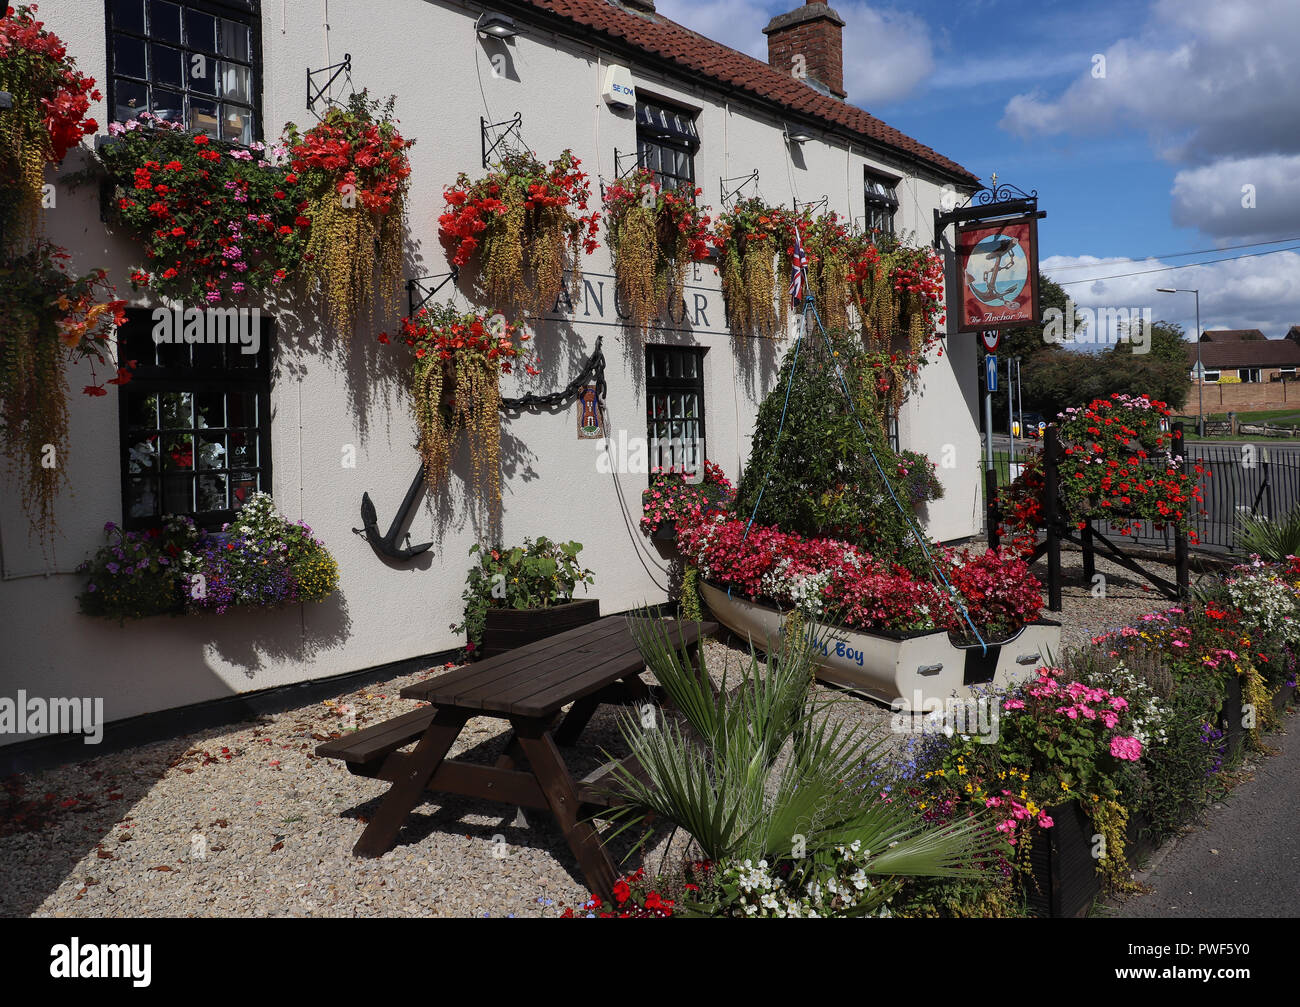 The Anchor Inn in Thornbury, Gloucestershire, UK continues the local tradition of displaying hanging flower baskets; was Britain in Bloom winner. Stock Photo